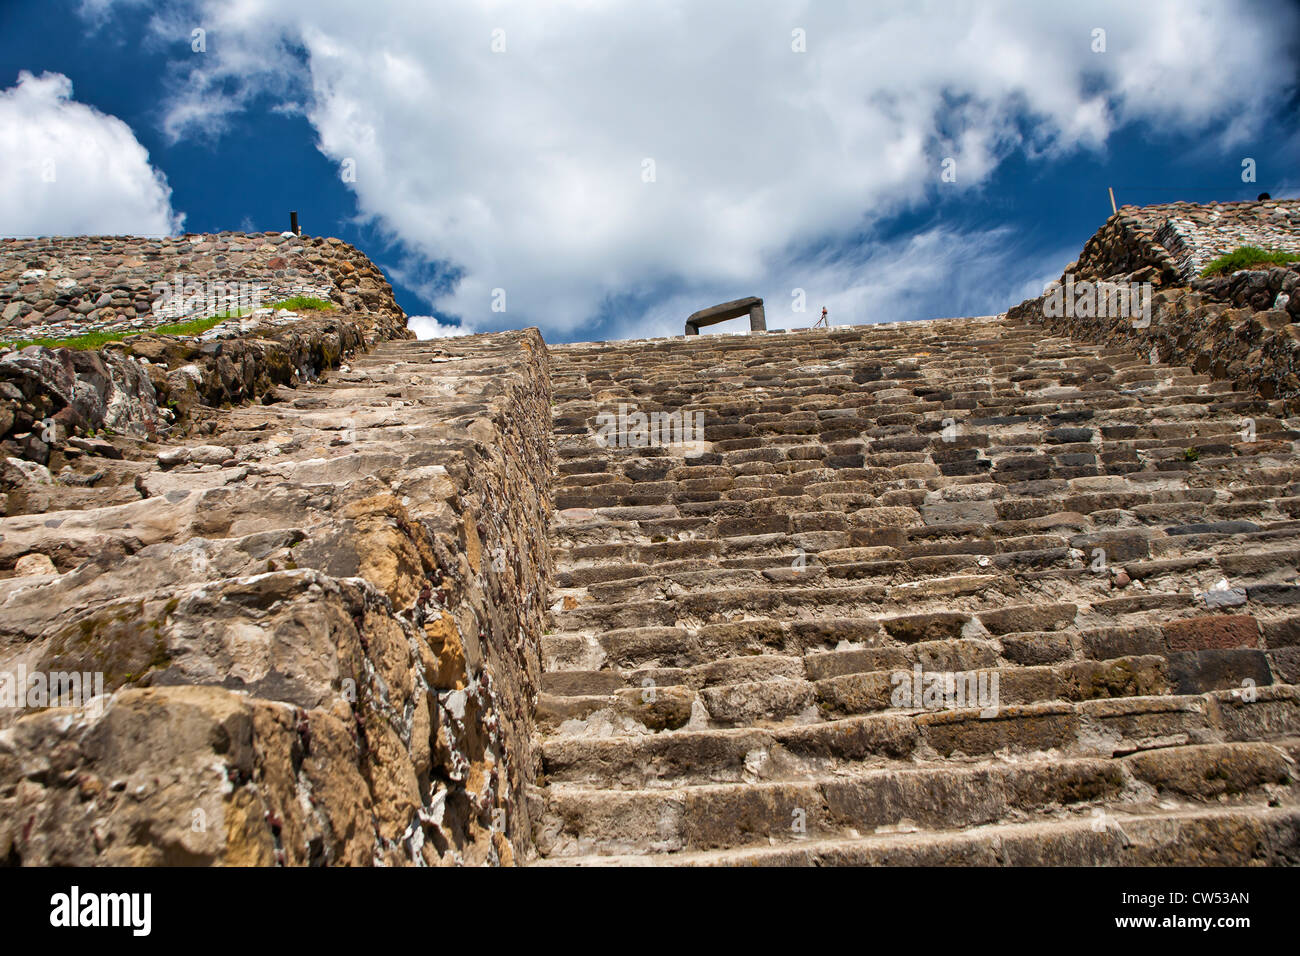 Pyramid of the Flowers - Xochitecatl archaeological site in the state of Tlaxcala, Mexico Stock Photo